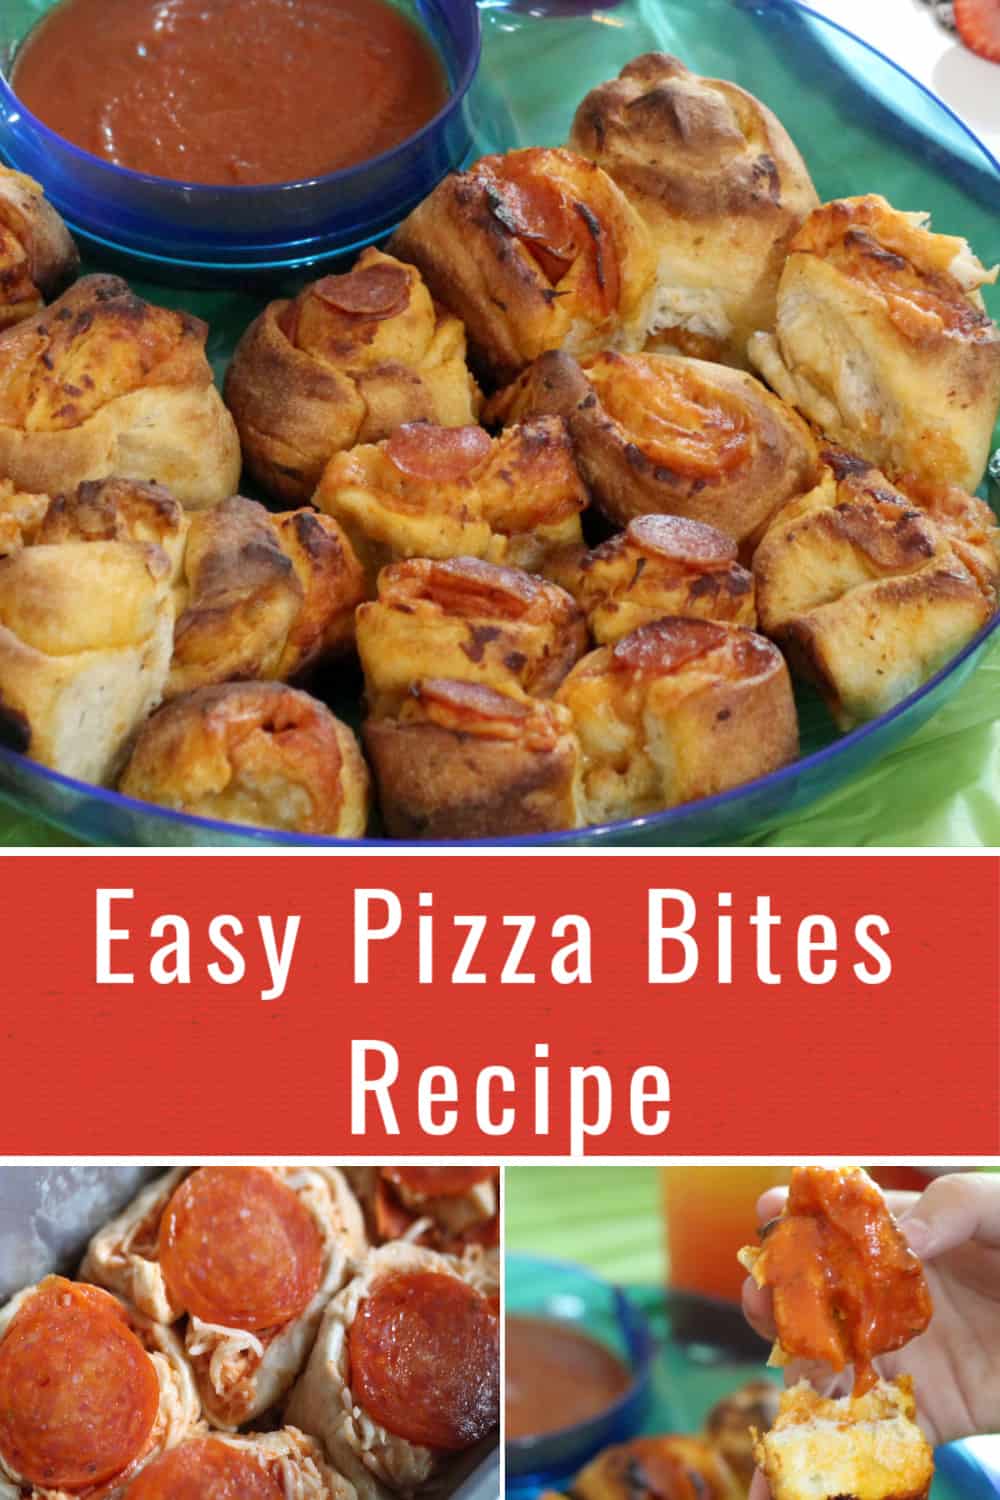 Easy Pizza Bites Recipe perfect for an Artemis Fowl party or any family entertaining event. 